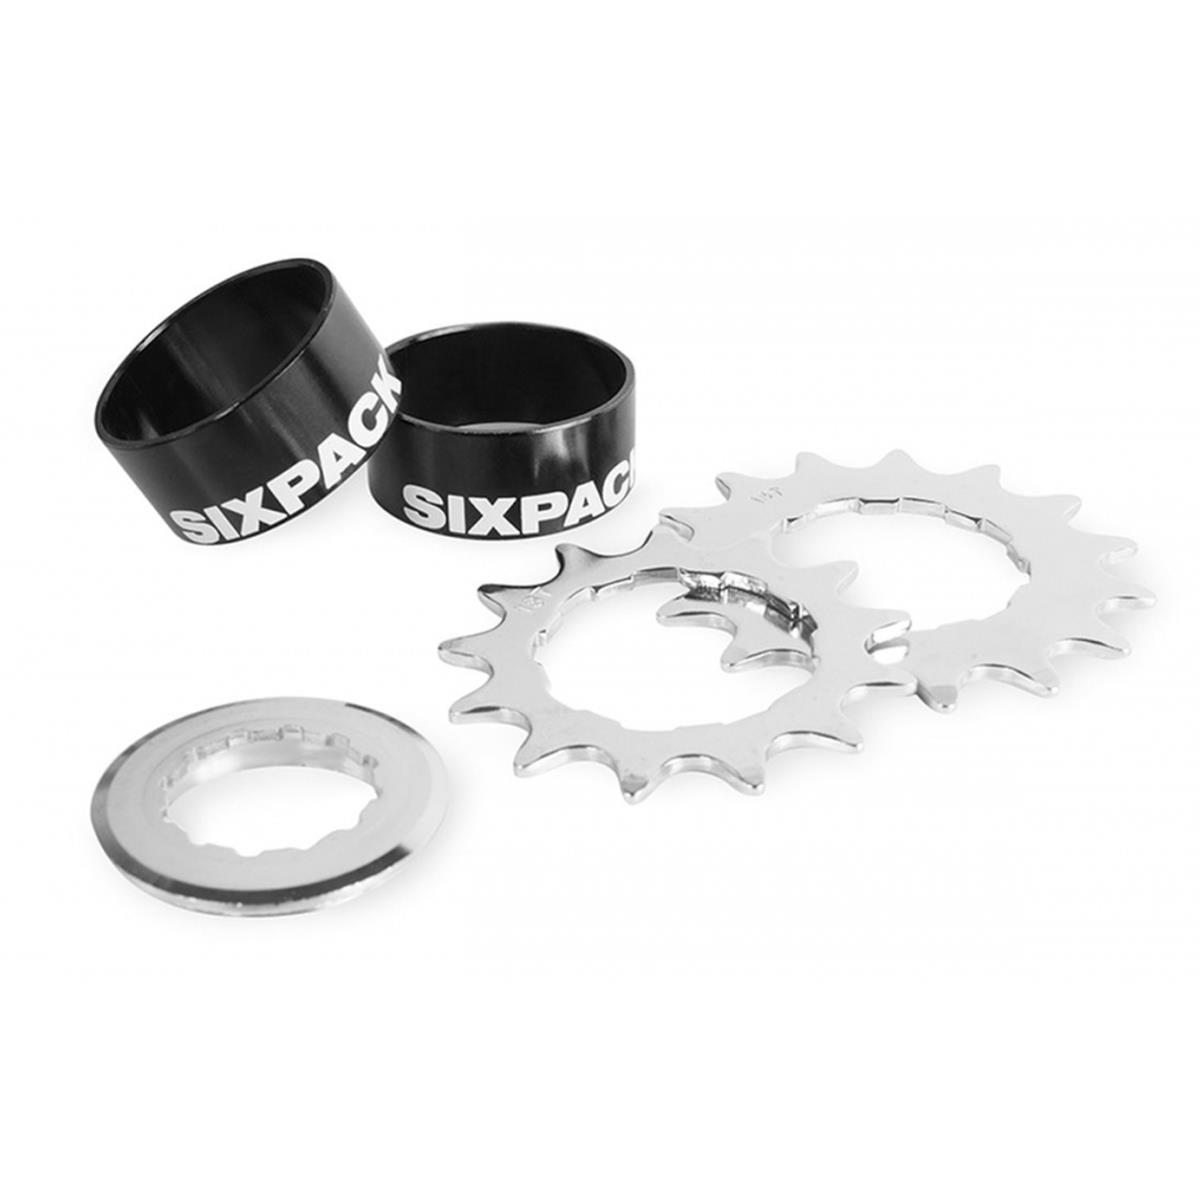 Sixpack Kit conversione Single Speed  Nero ,incl. 2 Chainrings (13 & 15T), fits 8/9710-V Shimano/Sram FreeRuotas